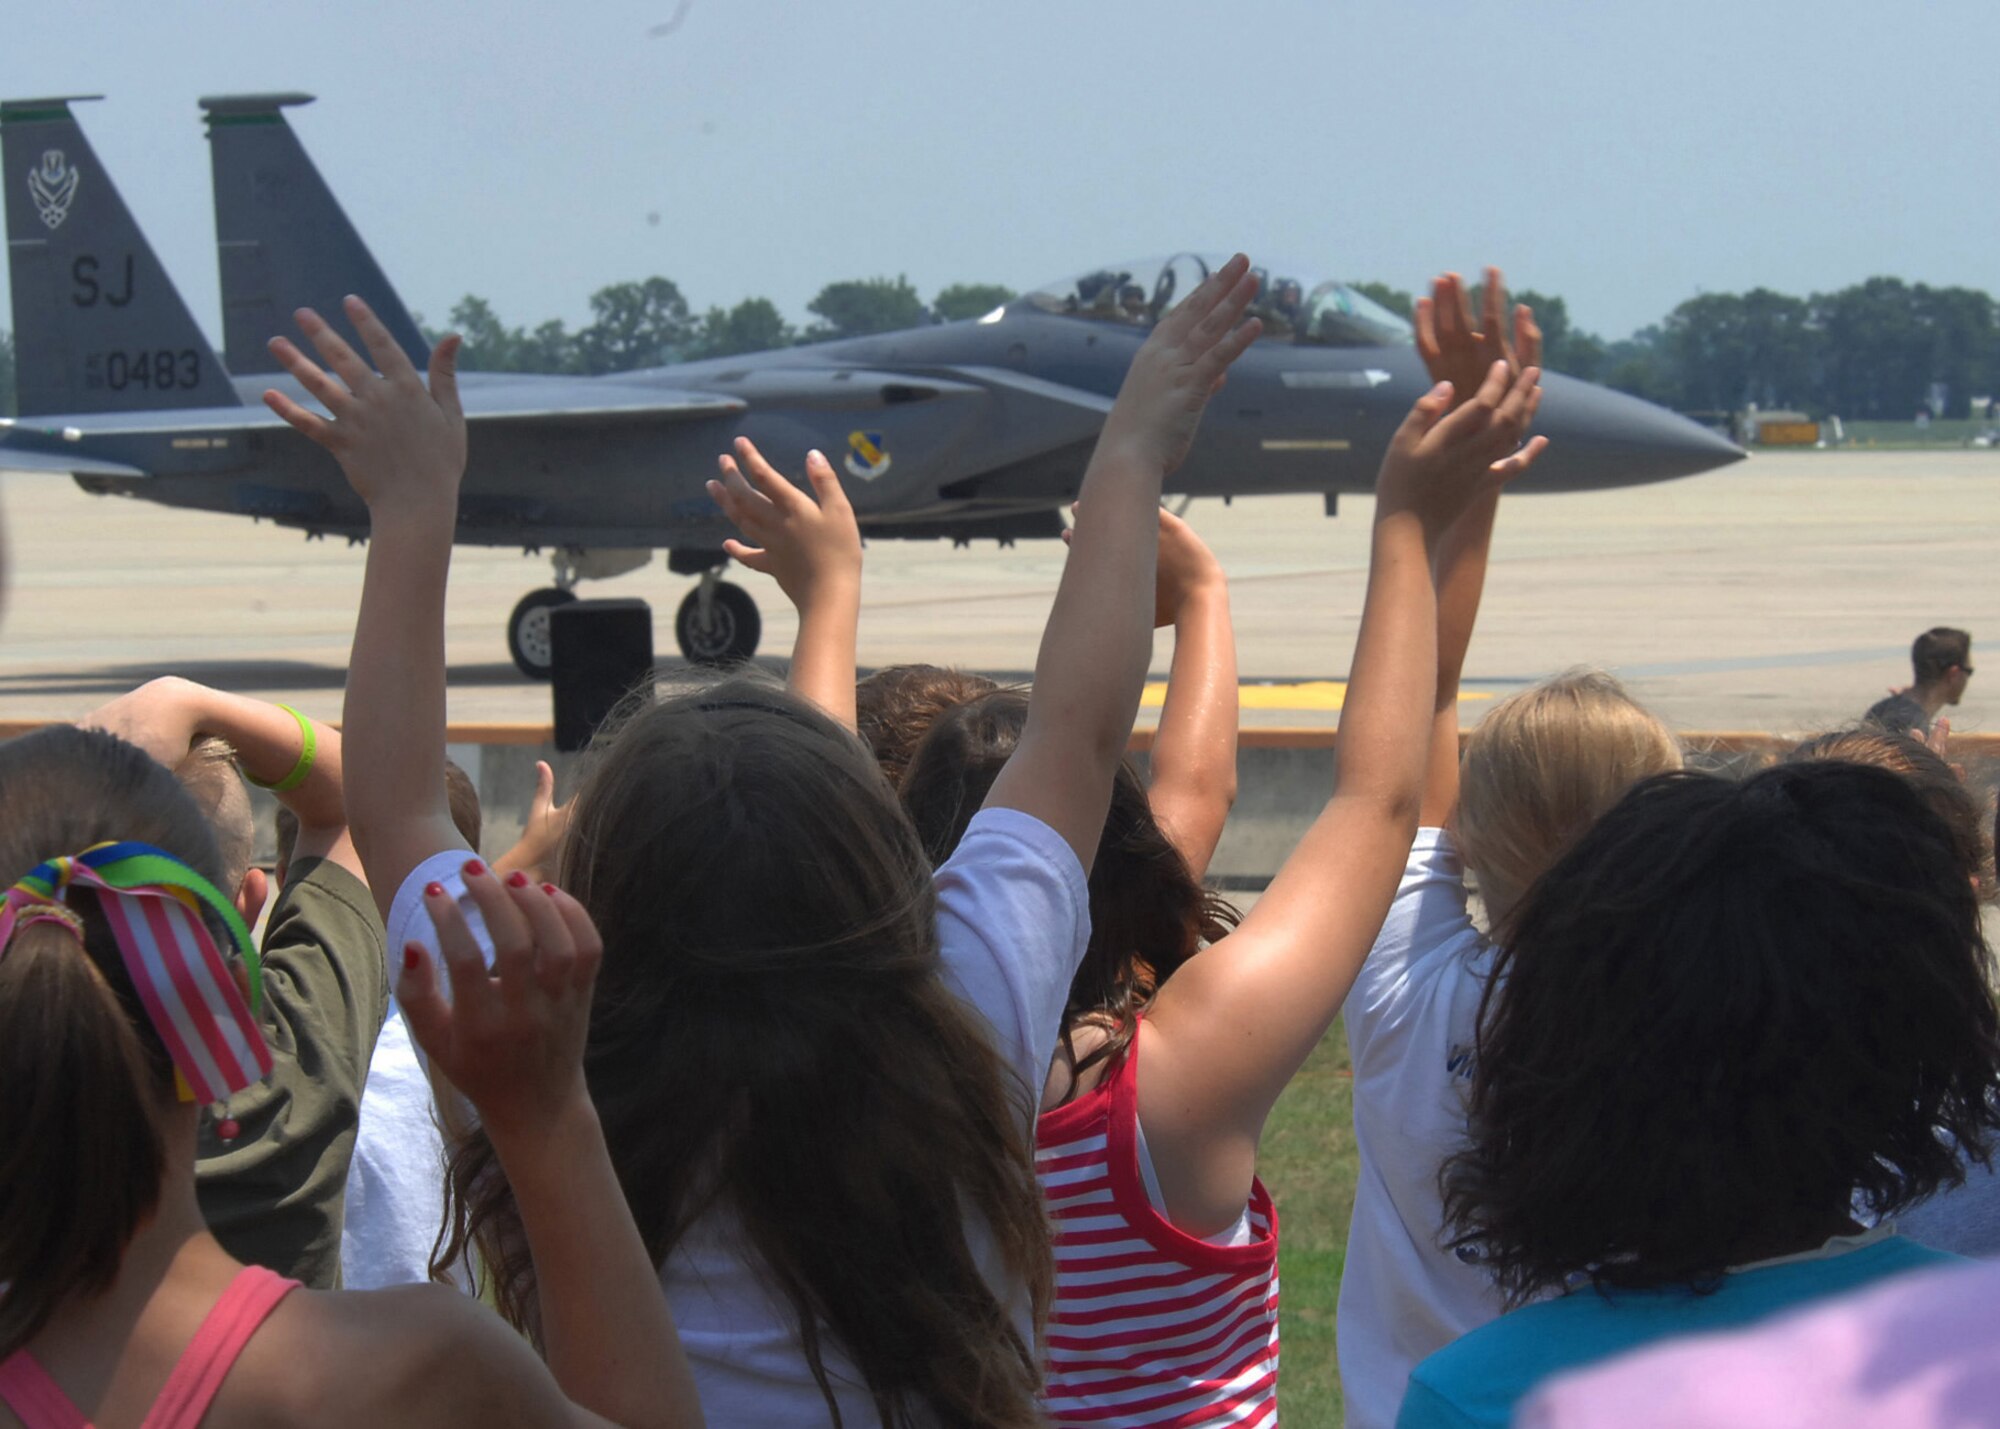 SEYMOUR JOHNSON AIR FORCE BASE, N.C. - Children participating in STARBASE, a program to raise interest and improve the knowledge and skills of youth in math, science, and technology, wave to the F-15E Demo Team pilots, June 17, 2008. The children had just witnessed the Demo Team perform several in-flight maneuvers as a display of the 4th Fighter Wing's aerial capabilities. (U.S. Air Force photo by Airman 1st Class Makenzie R. Lang)